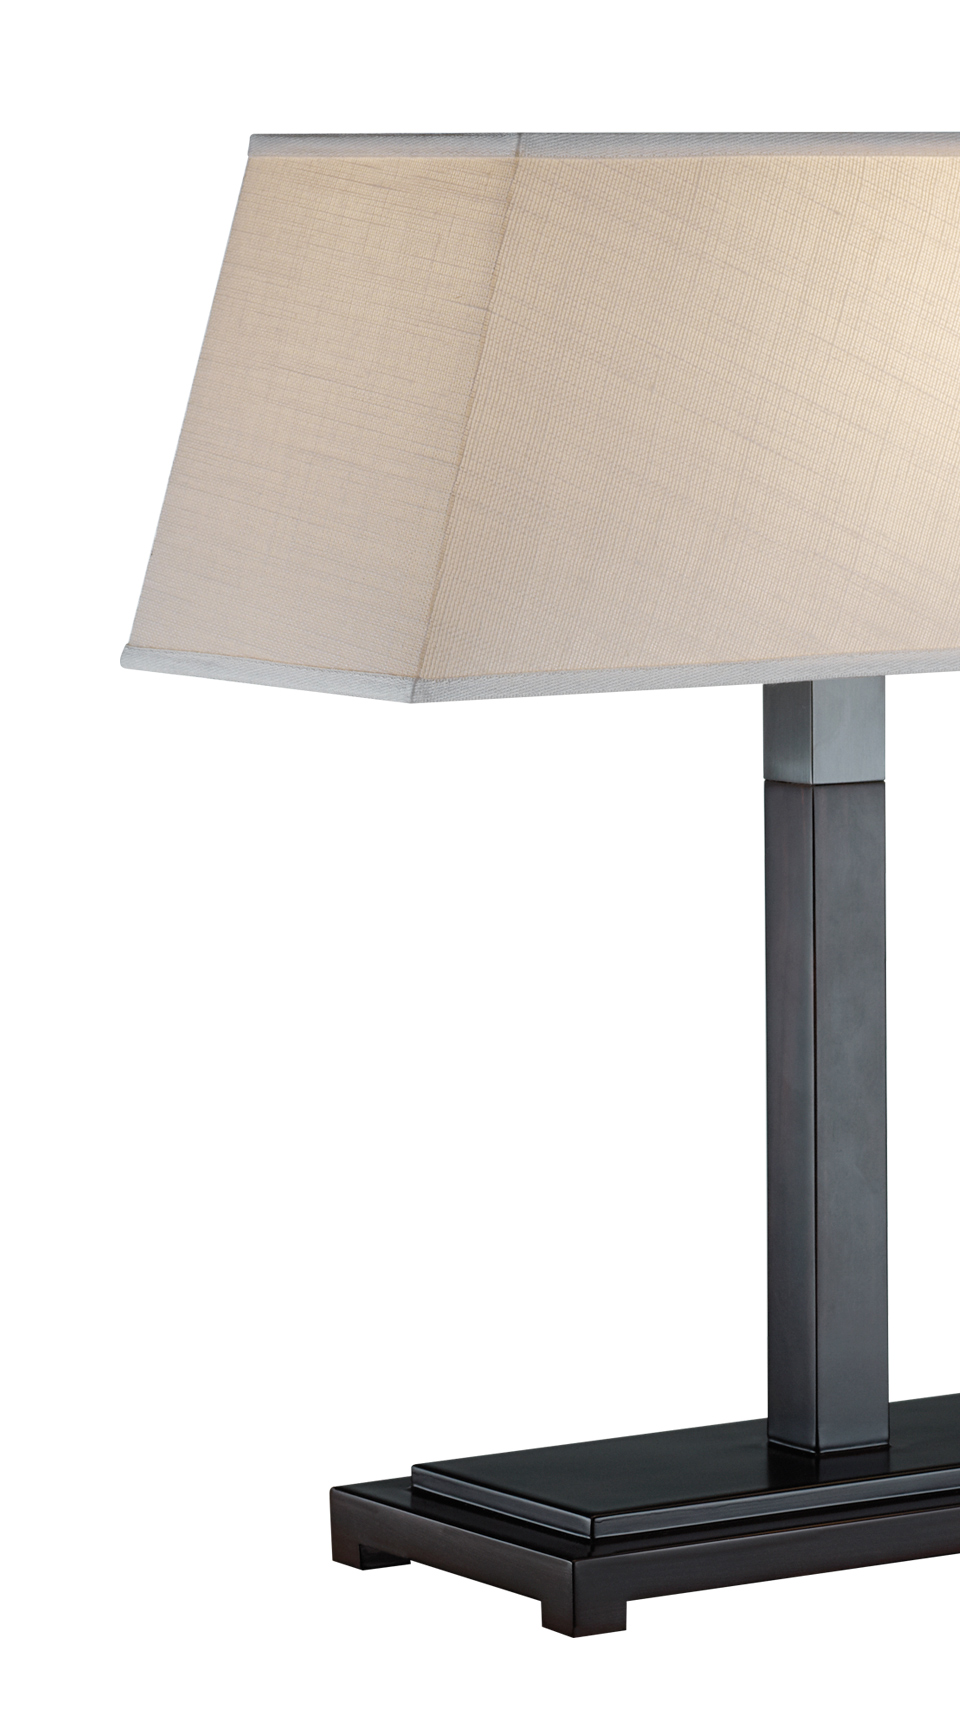 Warry is a table LED lamp with wooden structure, bronze details and linen, cotton or hand-embroidered silk lampshade, from Promemoria's catalogue | Promemoria